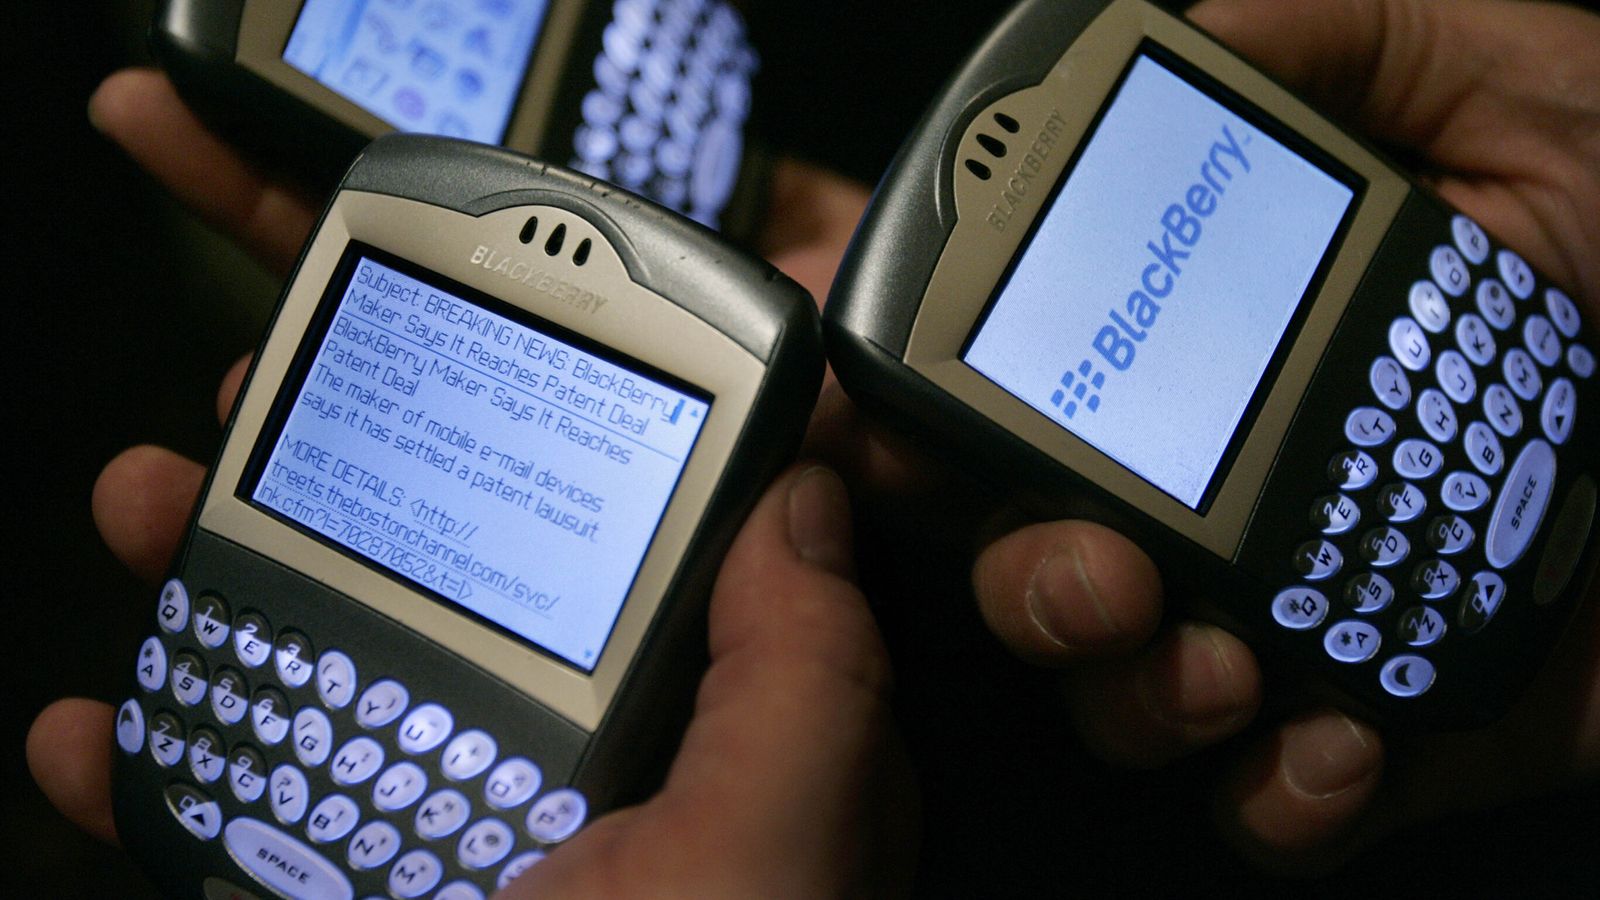 The rise and fall of BlackBerry - and why director thinks world may be ready for its return